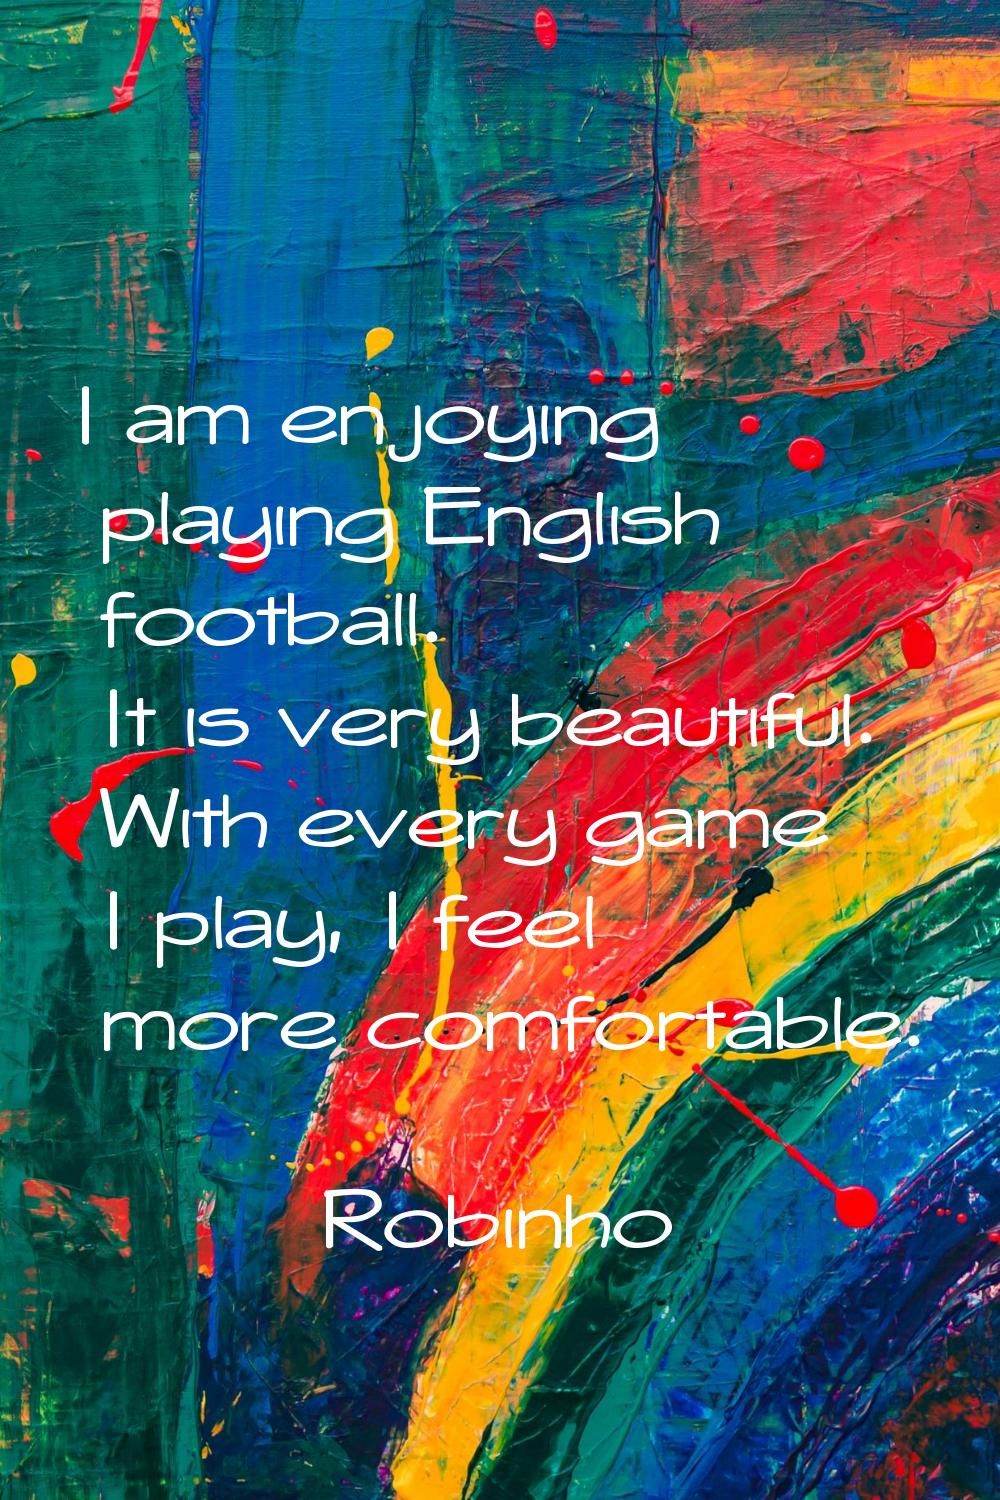 I am enjoying playing English football. It is very beautiful. With every game I play, I feel more c